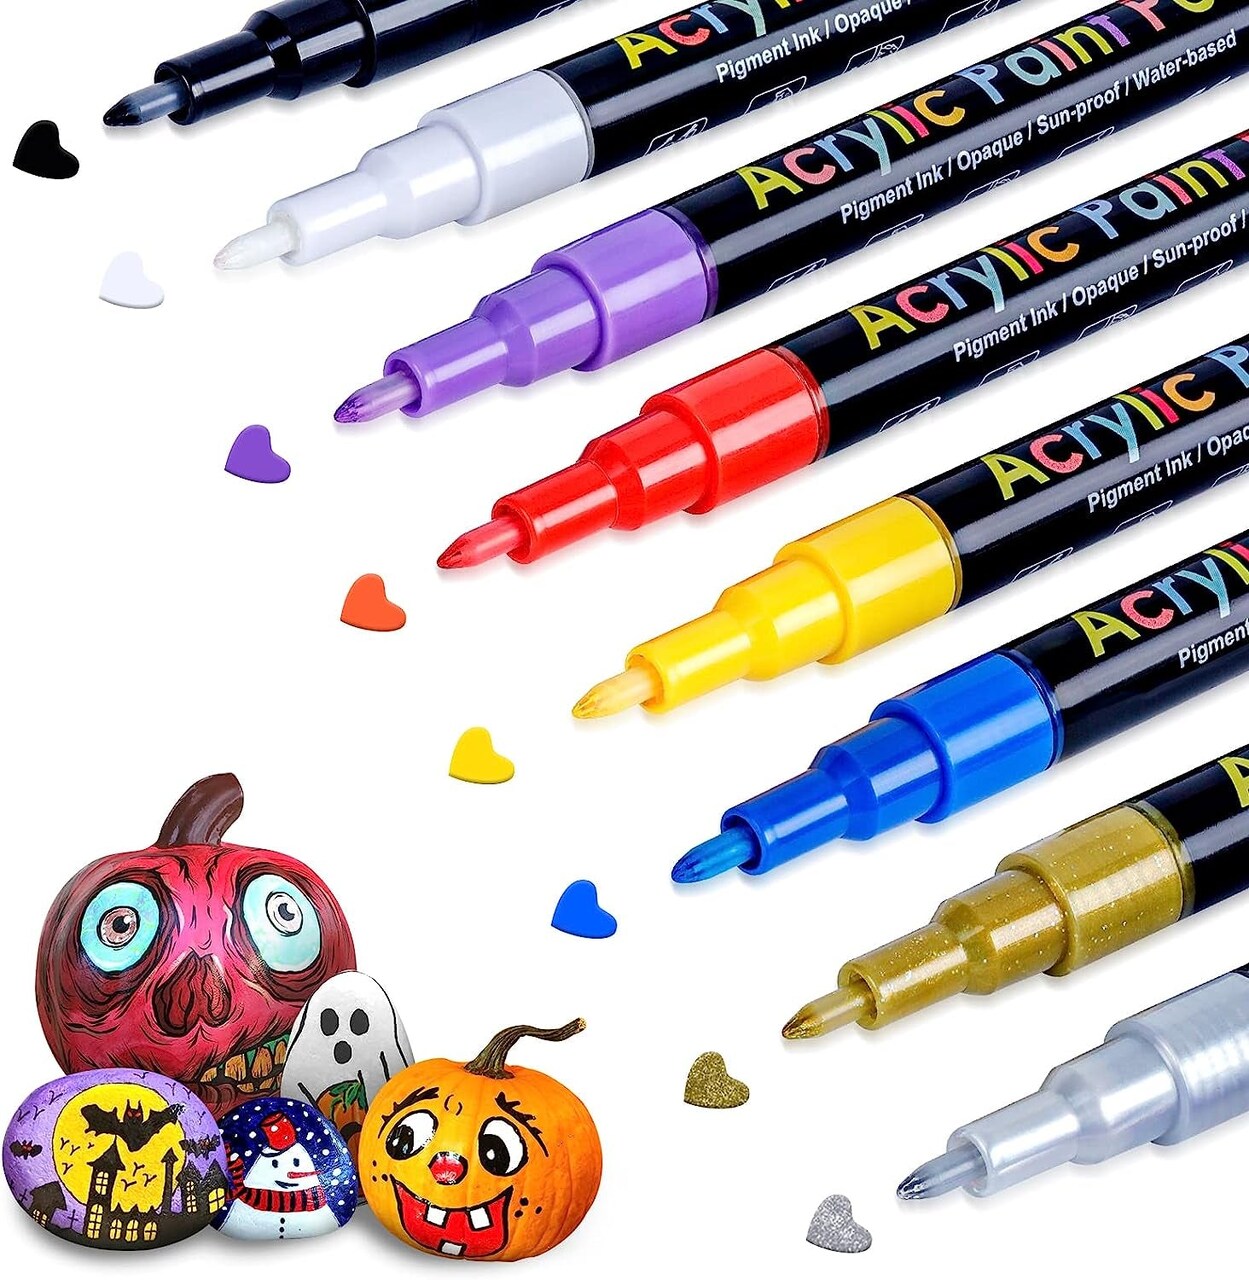 Acrylic Paint Pens Paint Markers Set of 18: Fine Point Paint Pens for Rock  Painting Glass Wood Ceramic Fabric Metal Canvas Easter Eggs Pumpkin Kit,  Drawing Art Crafts for Adults Scrapbooking Supplies